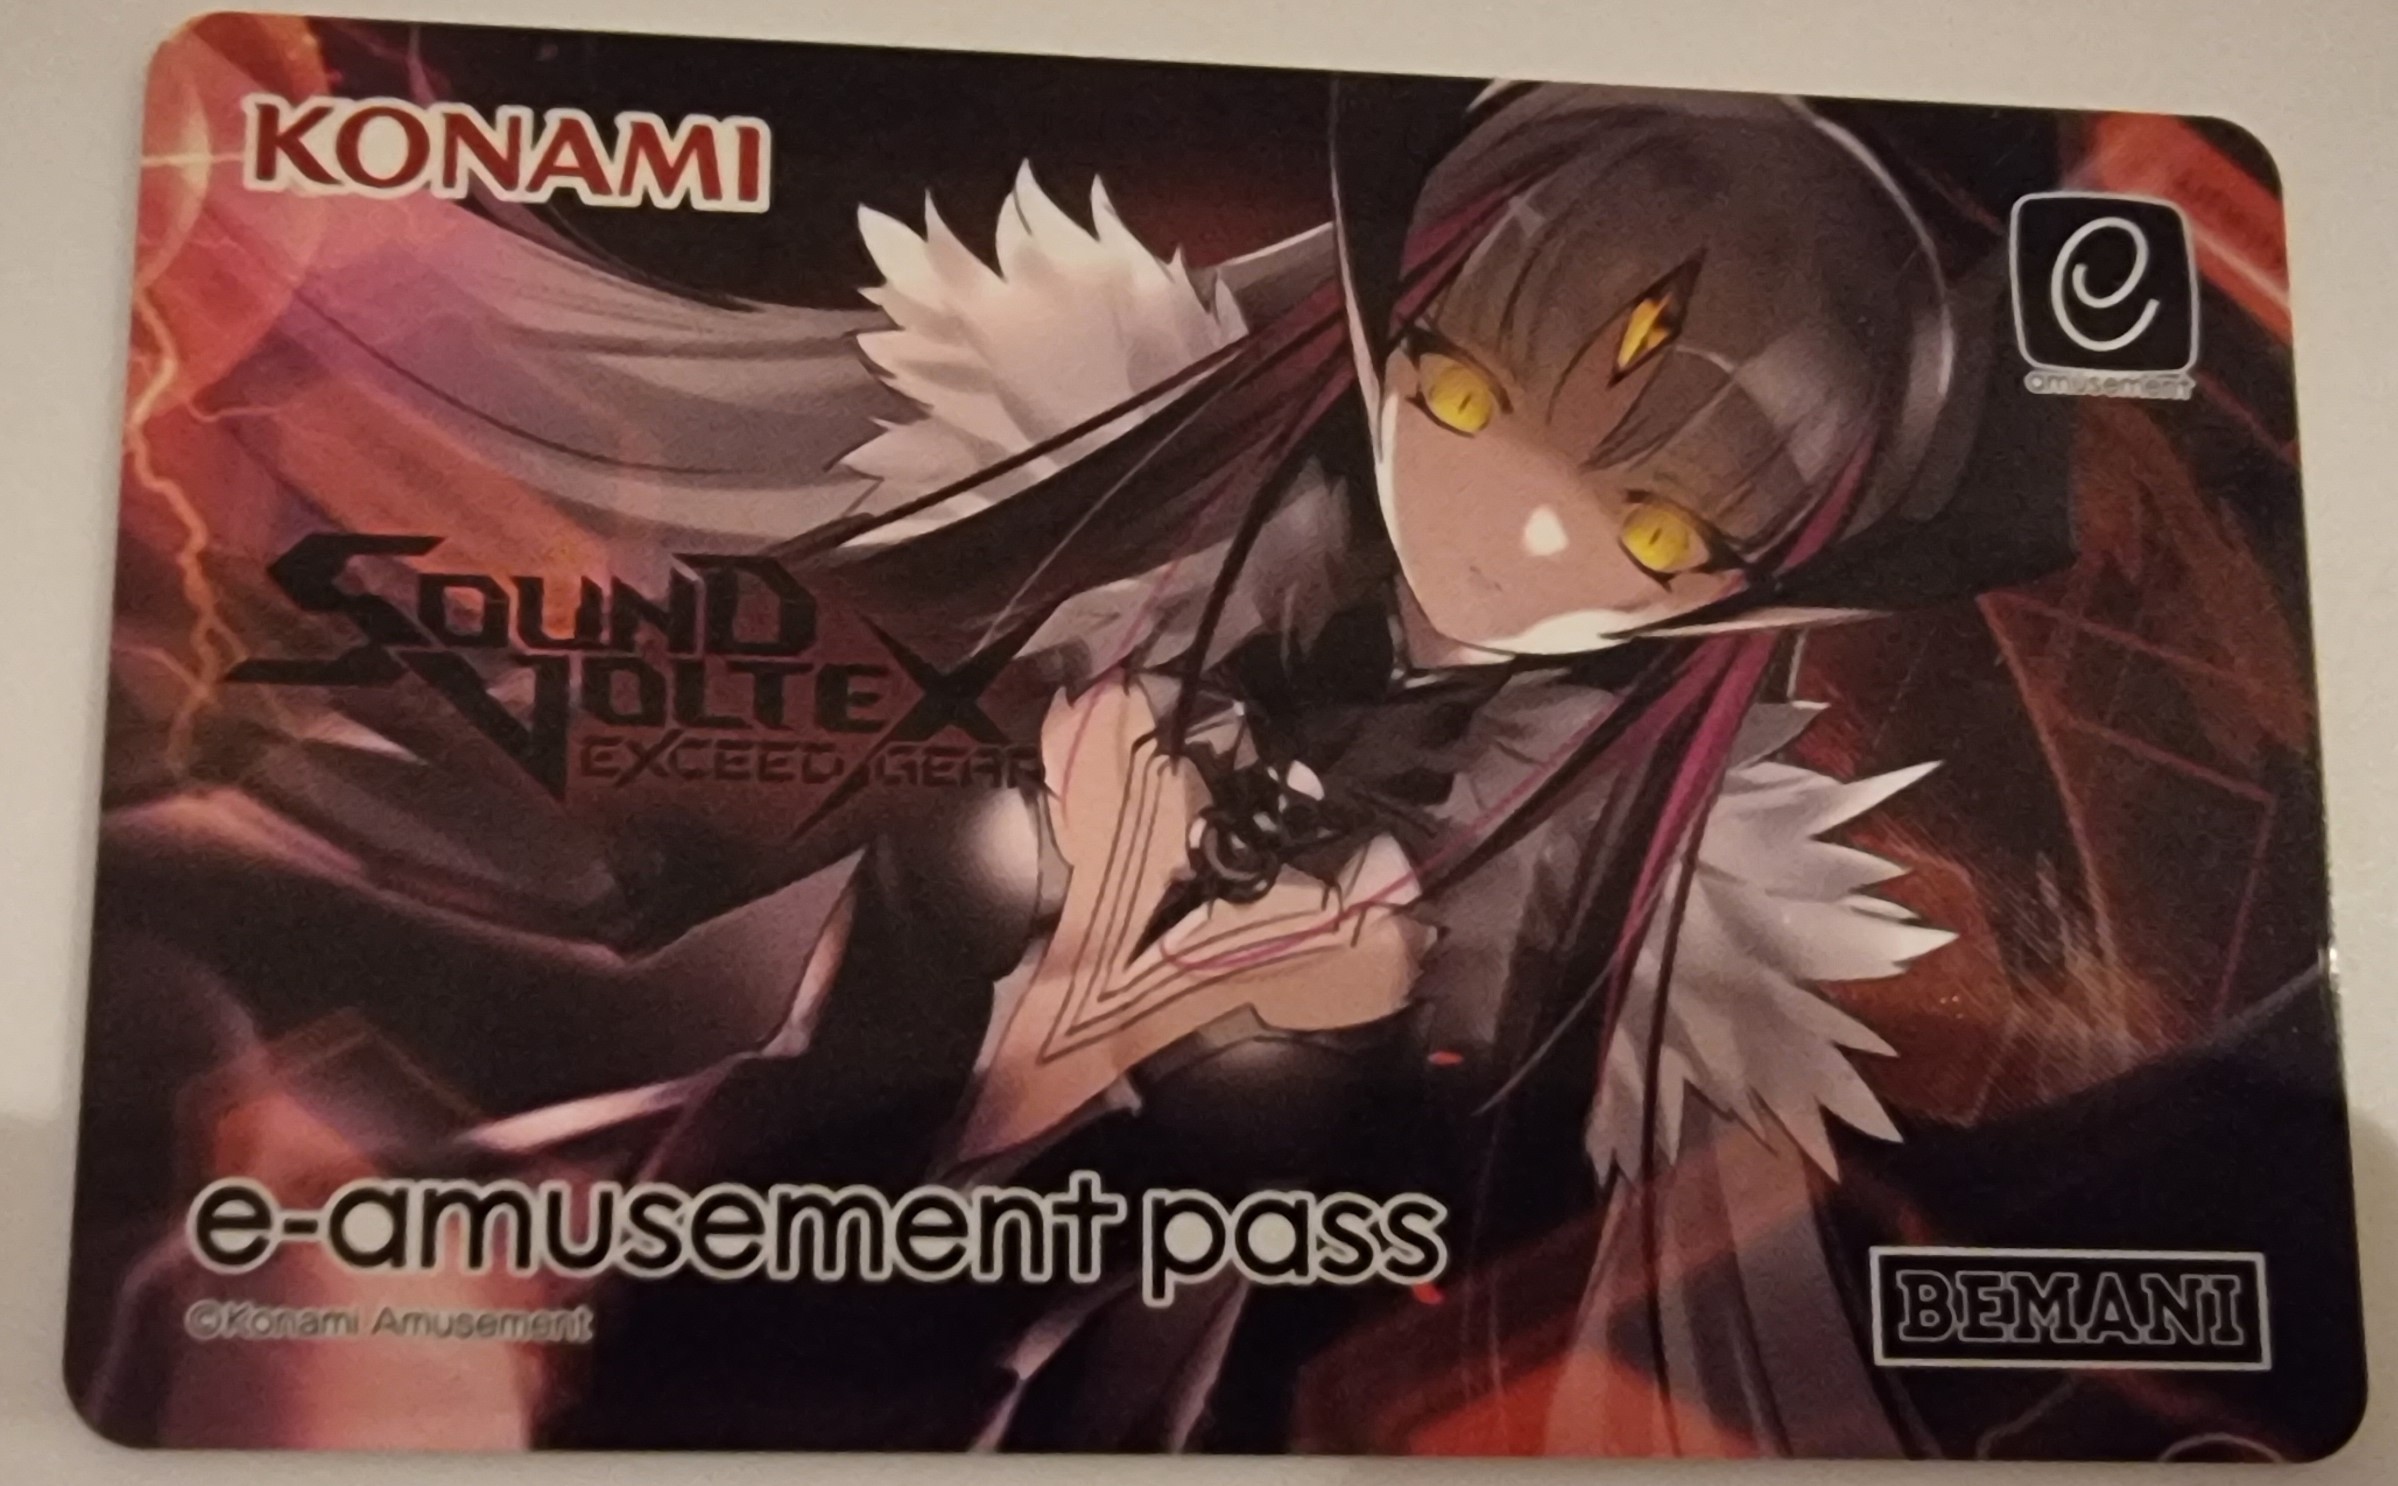 A different e-amusement card. It has a design of a yellow-eyed demon-esque lady on it, with the Sound Voltex game logo to her left.